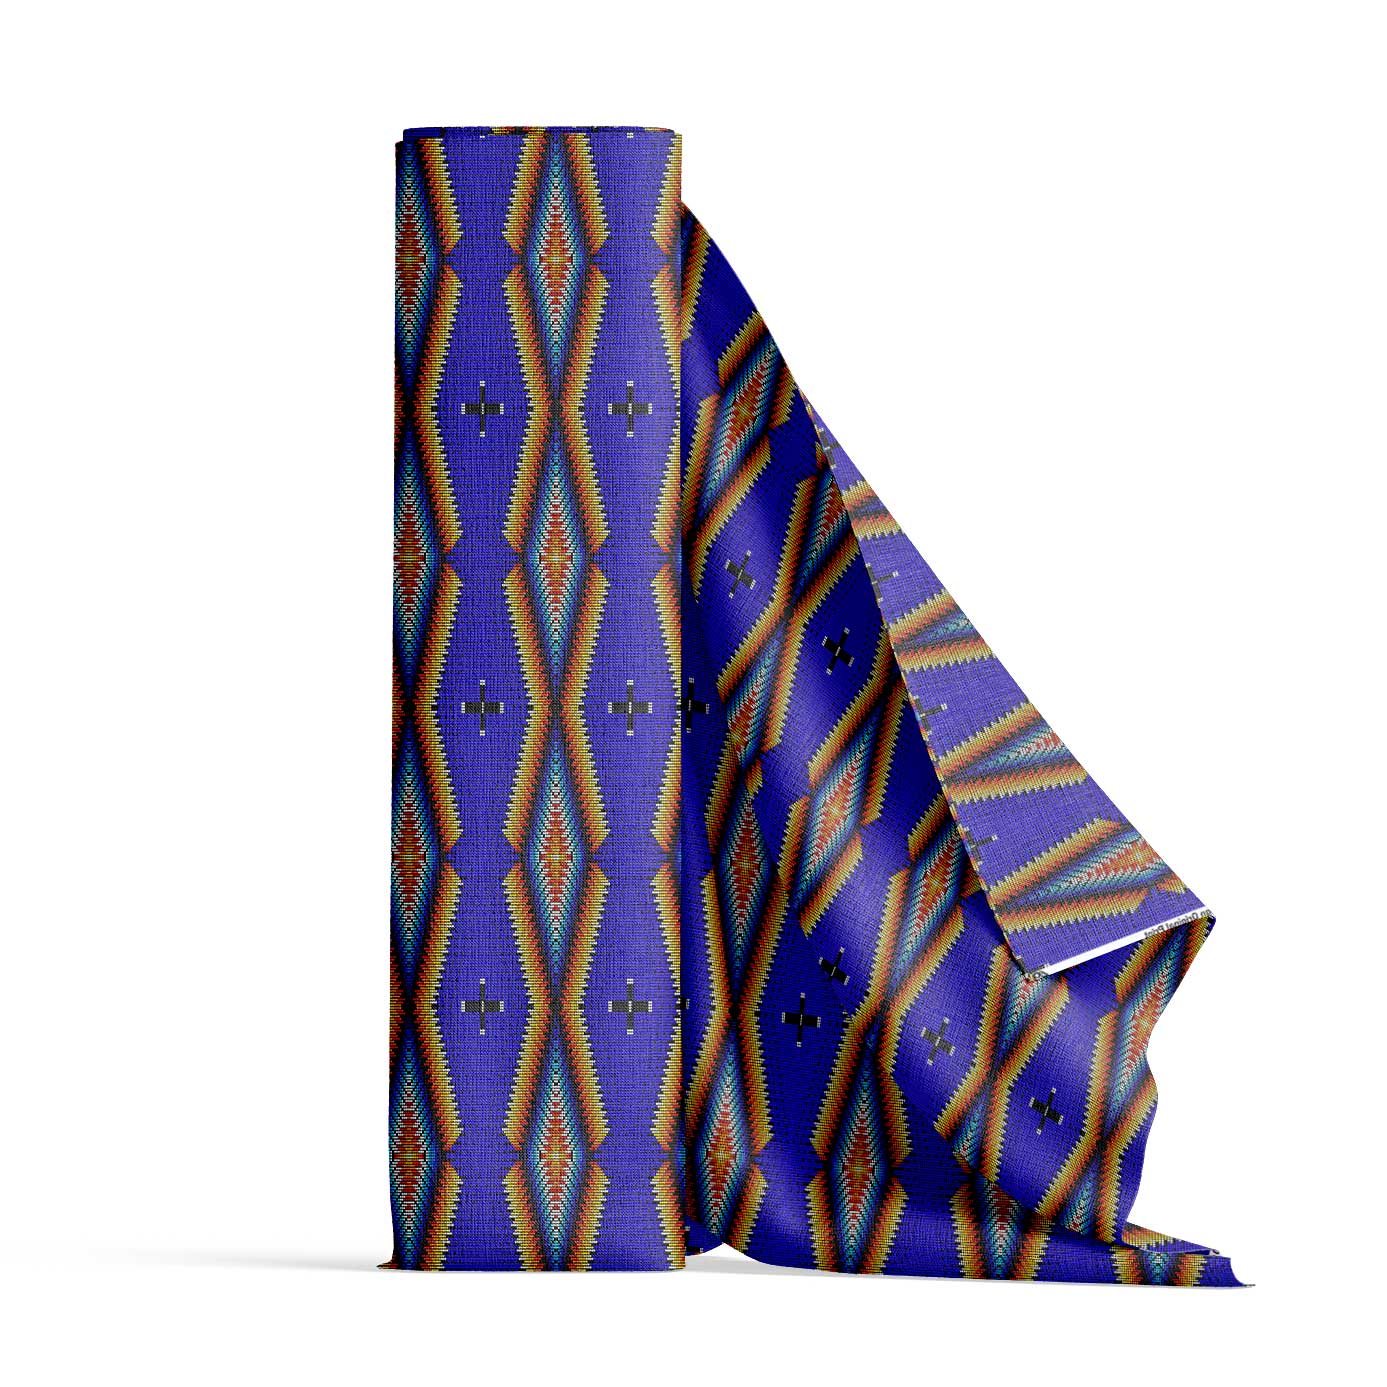 Diamond in the Bluff Blue Satin Fabric By the Yard Pre Order